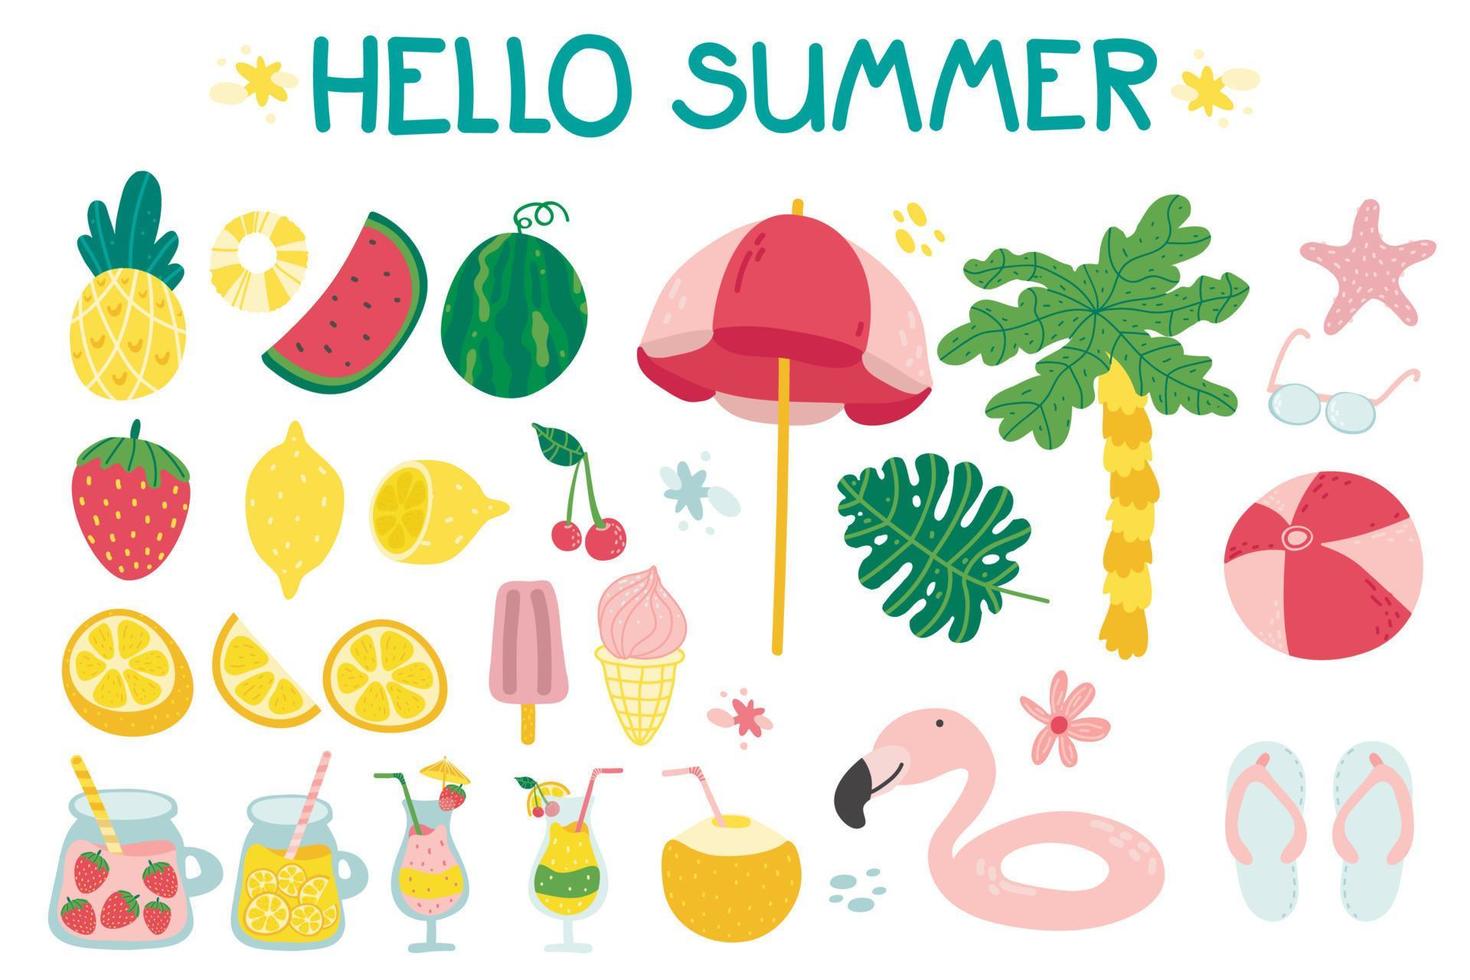 Summer set with cute beach elements and lettering cocktail, juice, ice cream, fruits, flowers, palm trees. Hand drawn flat cartoon elements. poster, card, scrapbooking, tag, invitation, sticker kit. vector